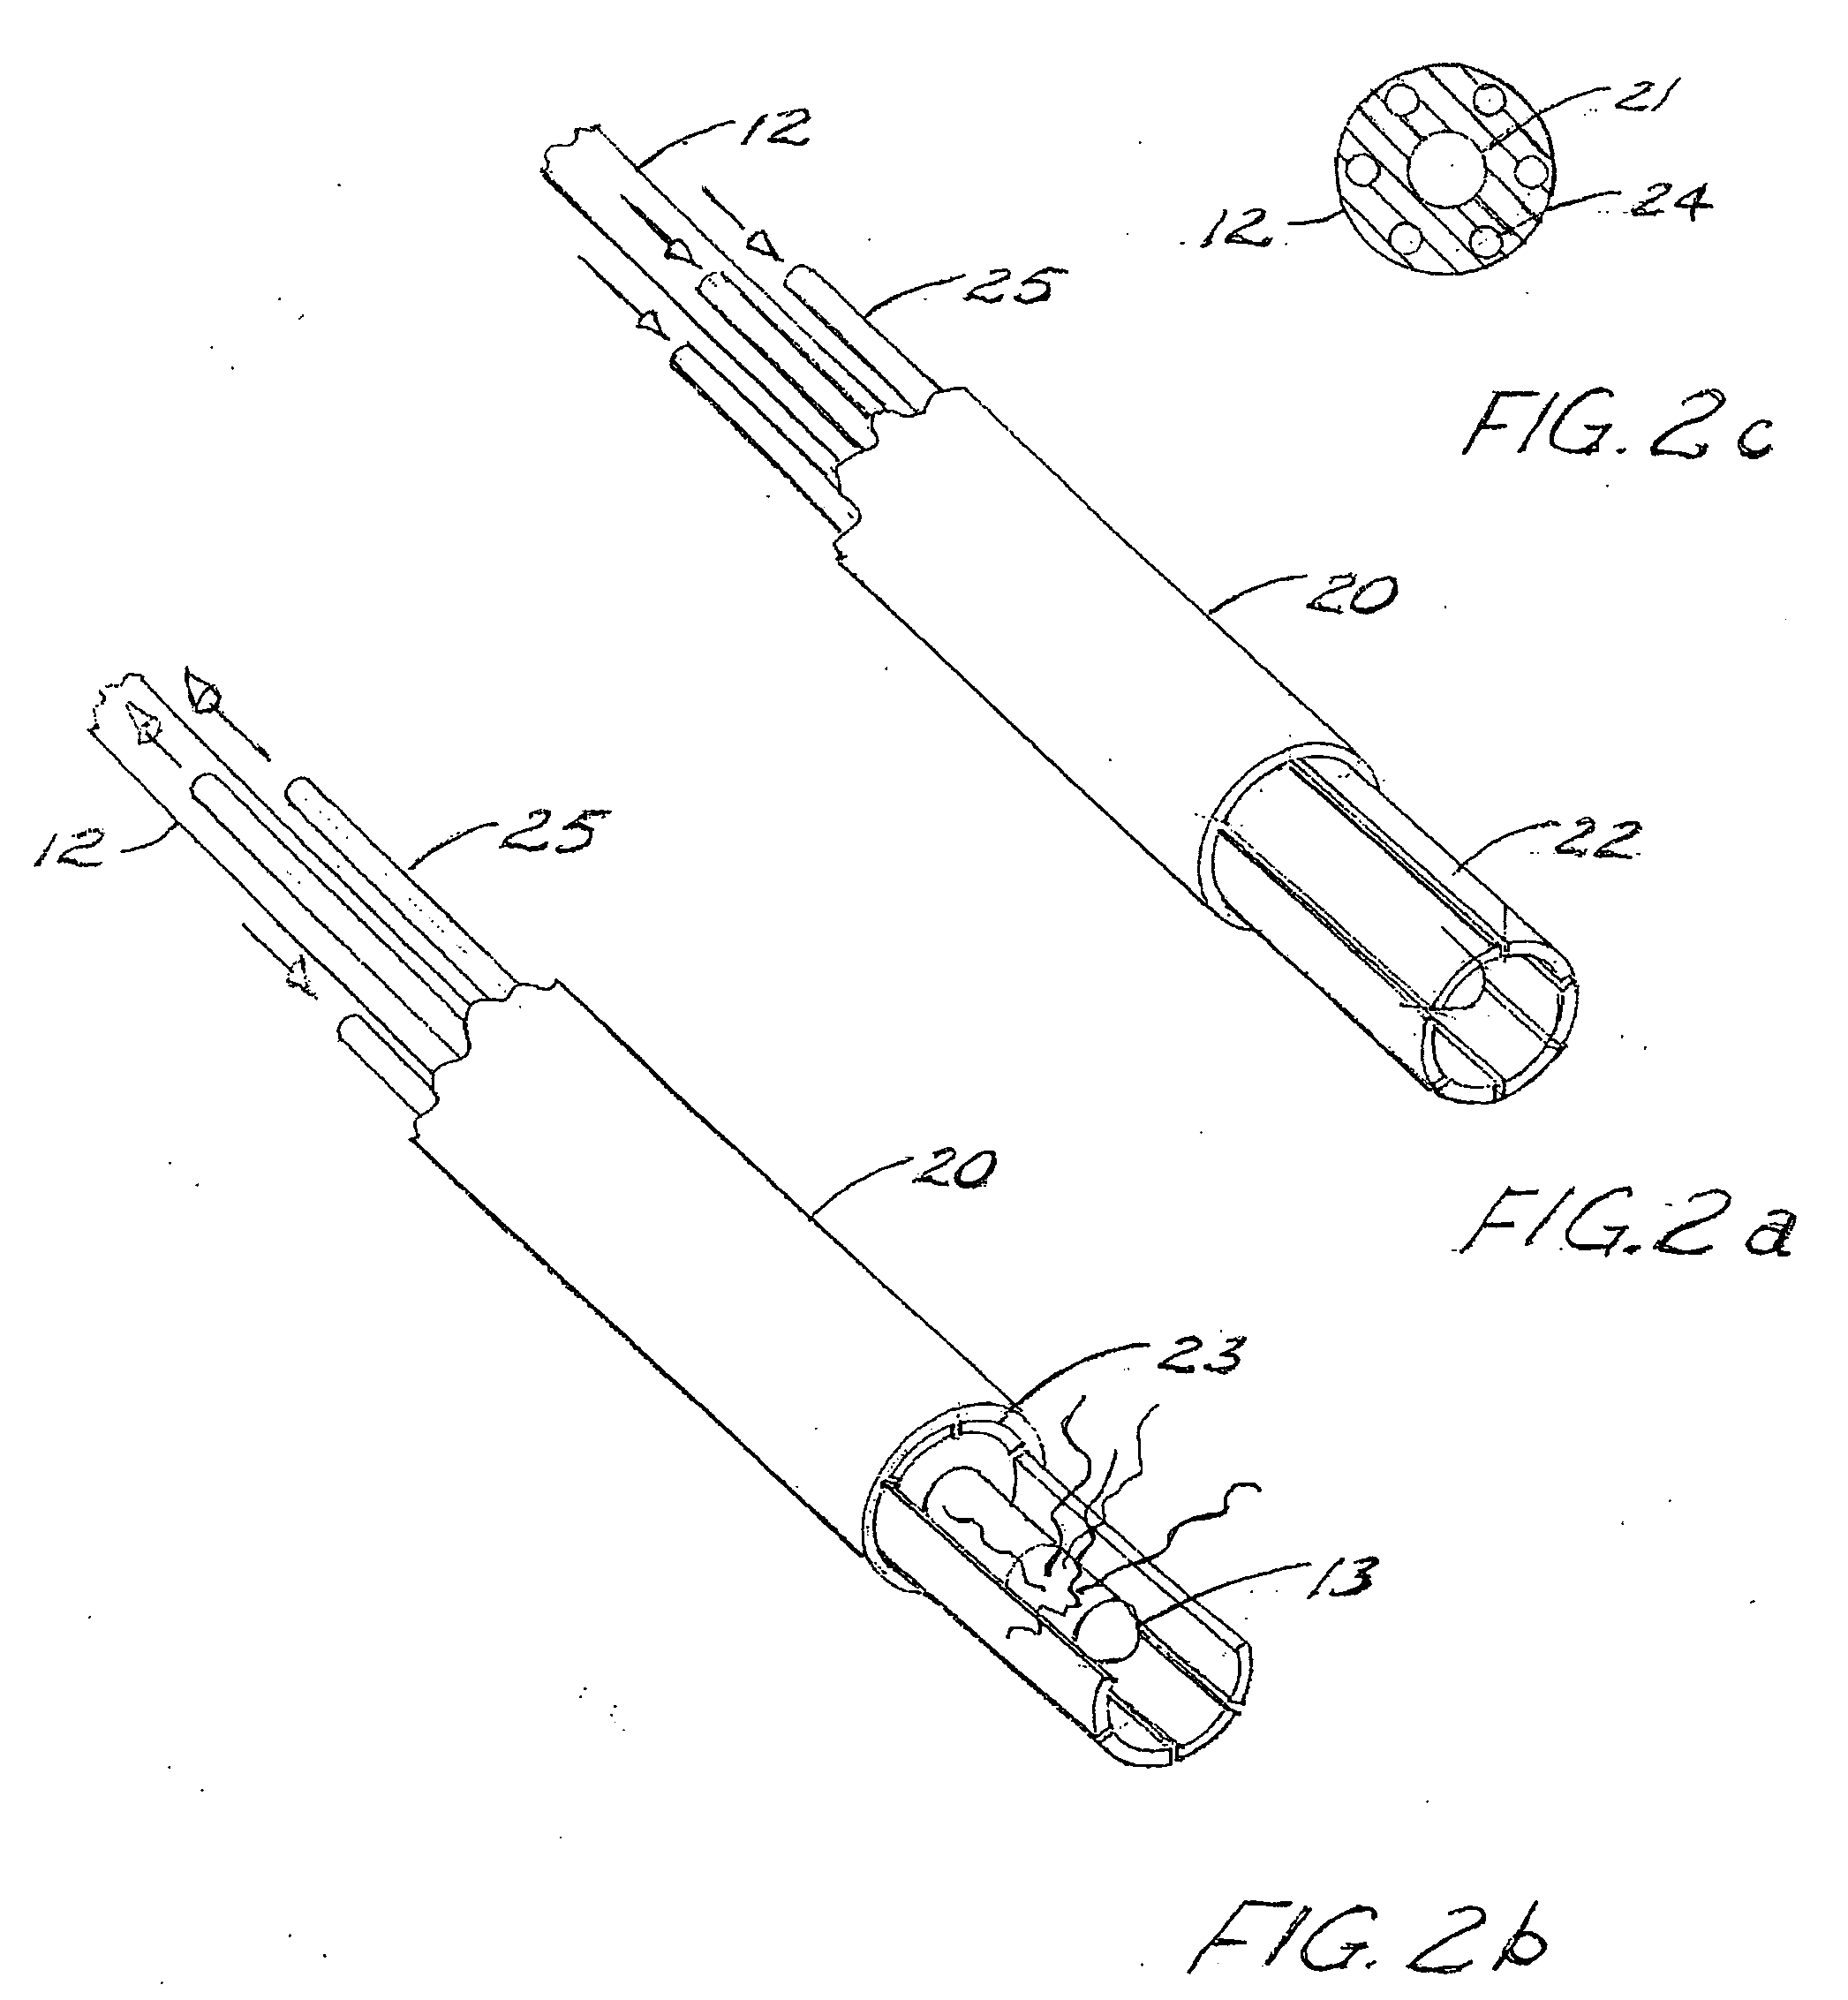 Radiation therapy apparatus with selective shielding capability